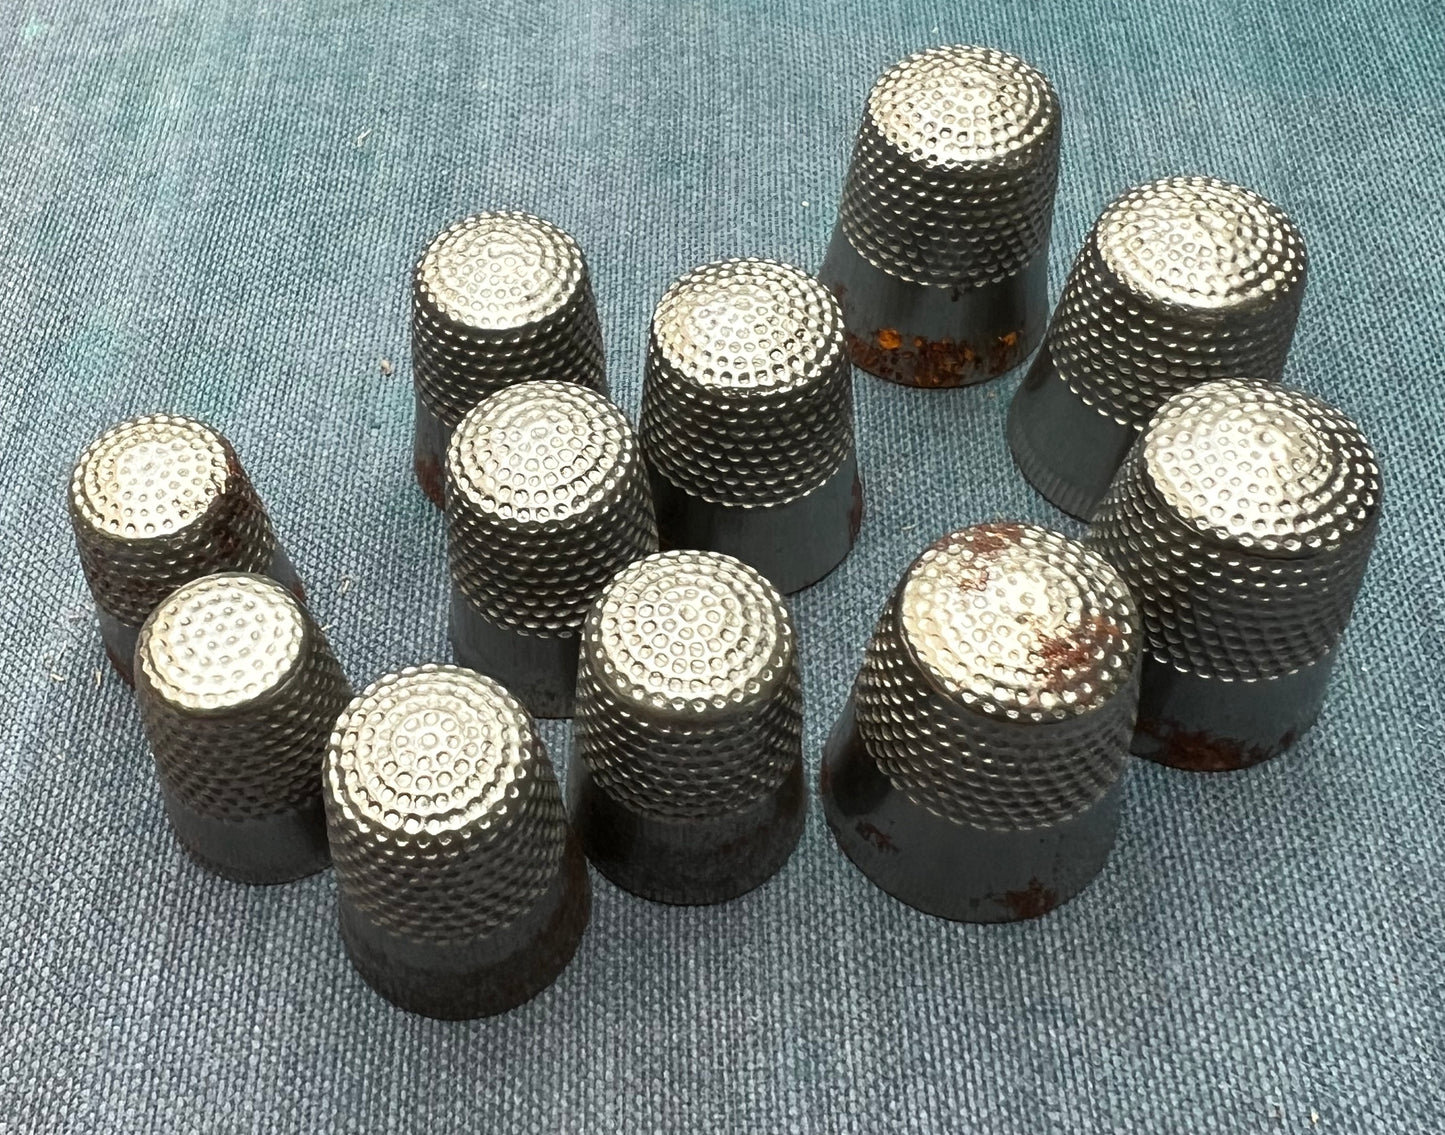 144 Rusty Vintage Thimbles..Different Sizes...Endless Creative Possibilities